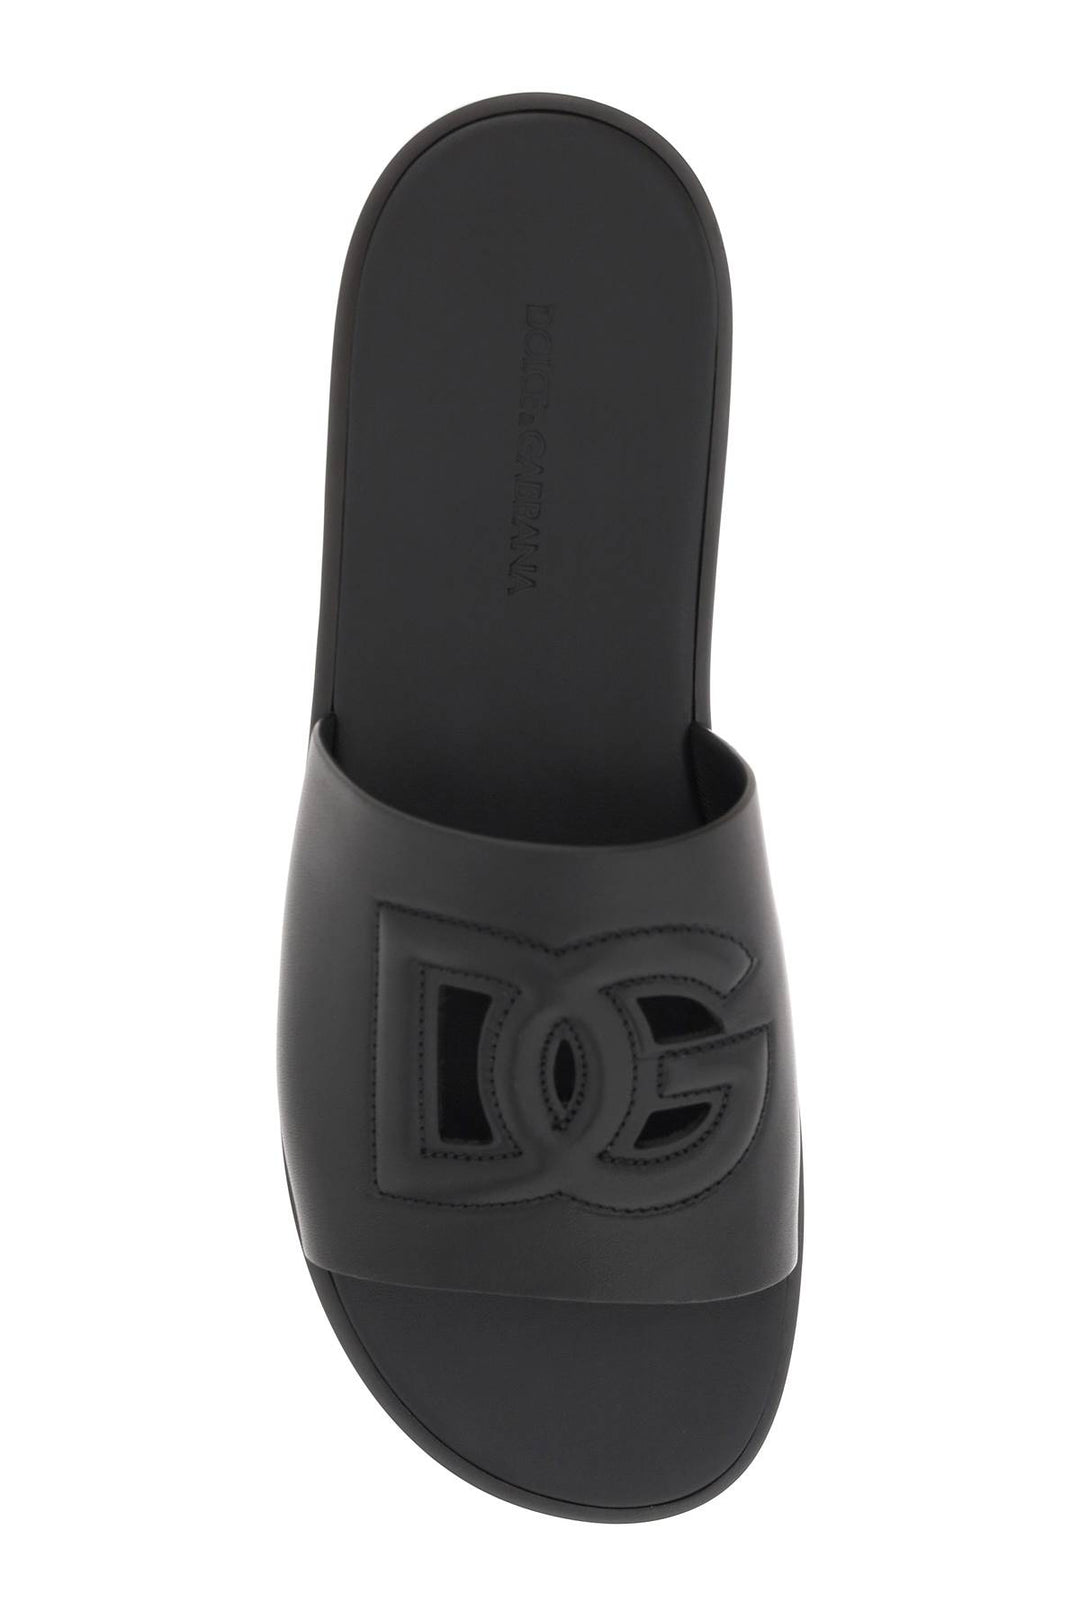 Dolce & Gabbana Leather Slides With Dg Cut Out   Black